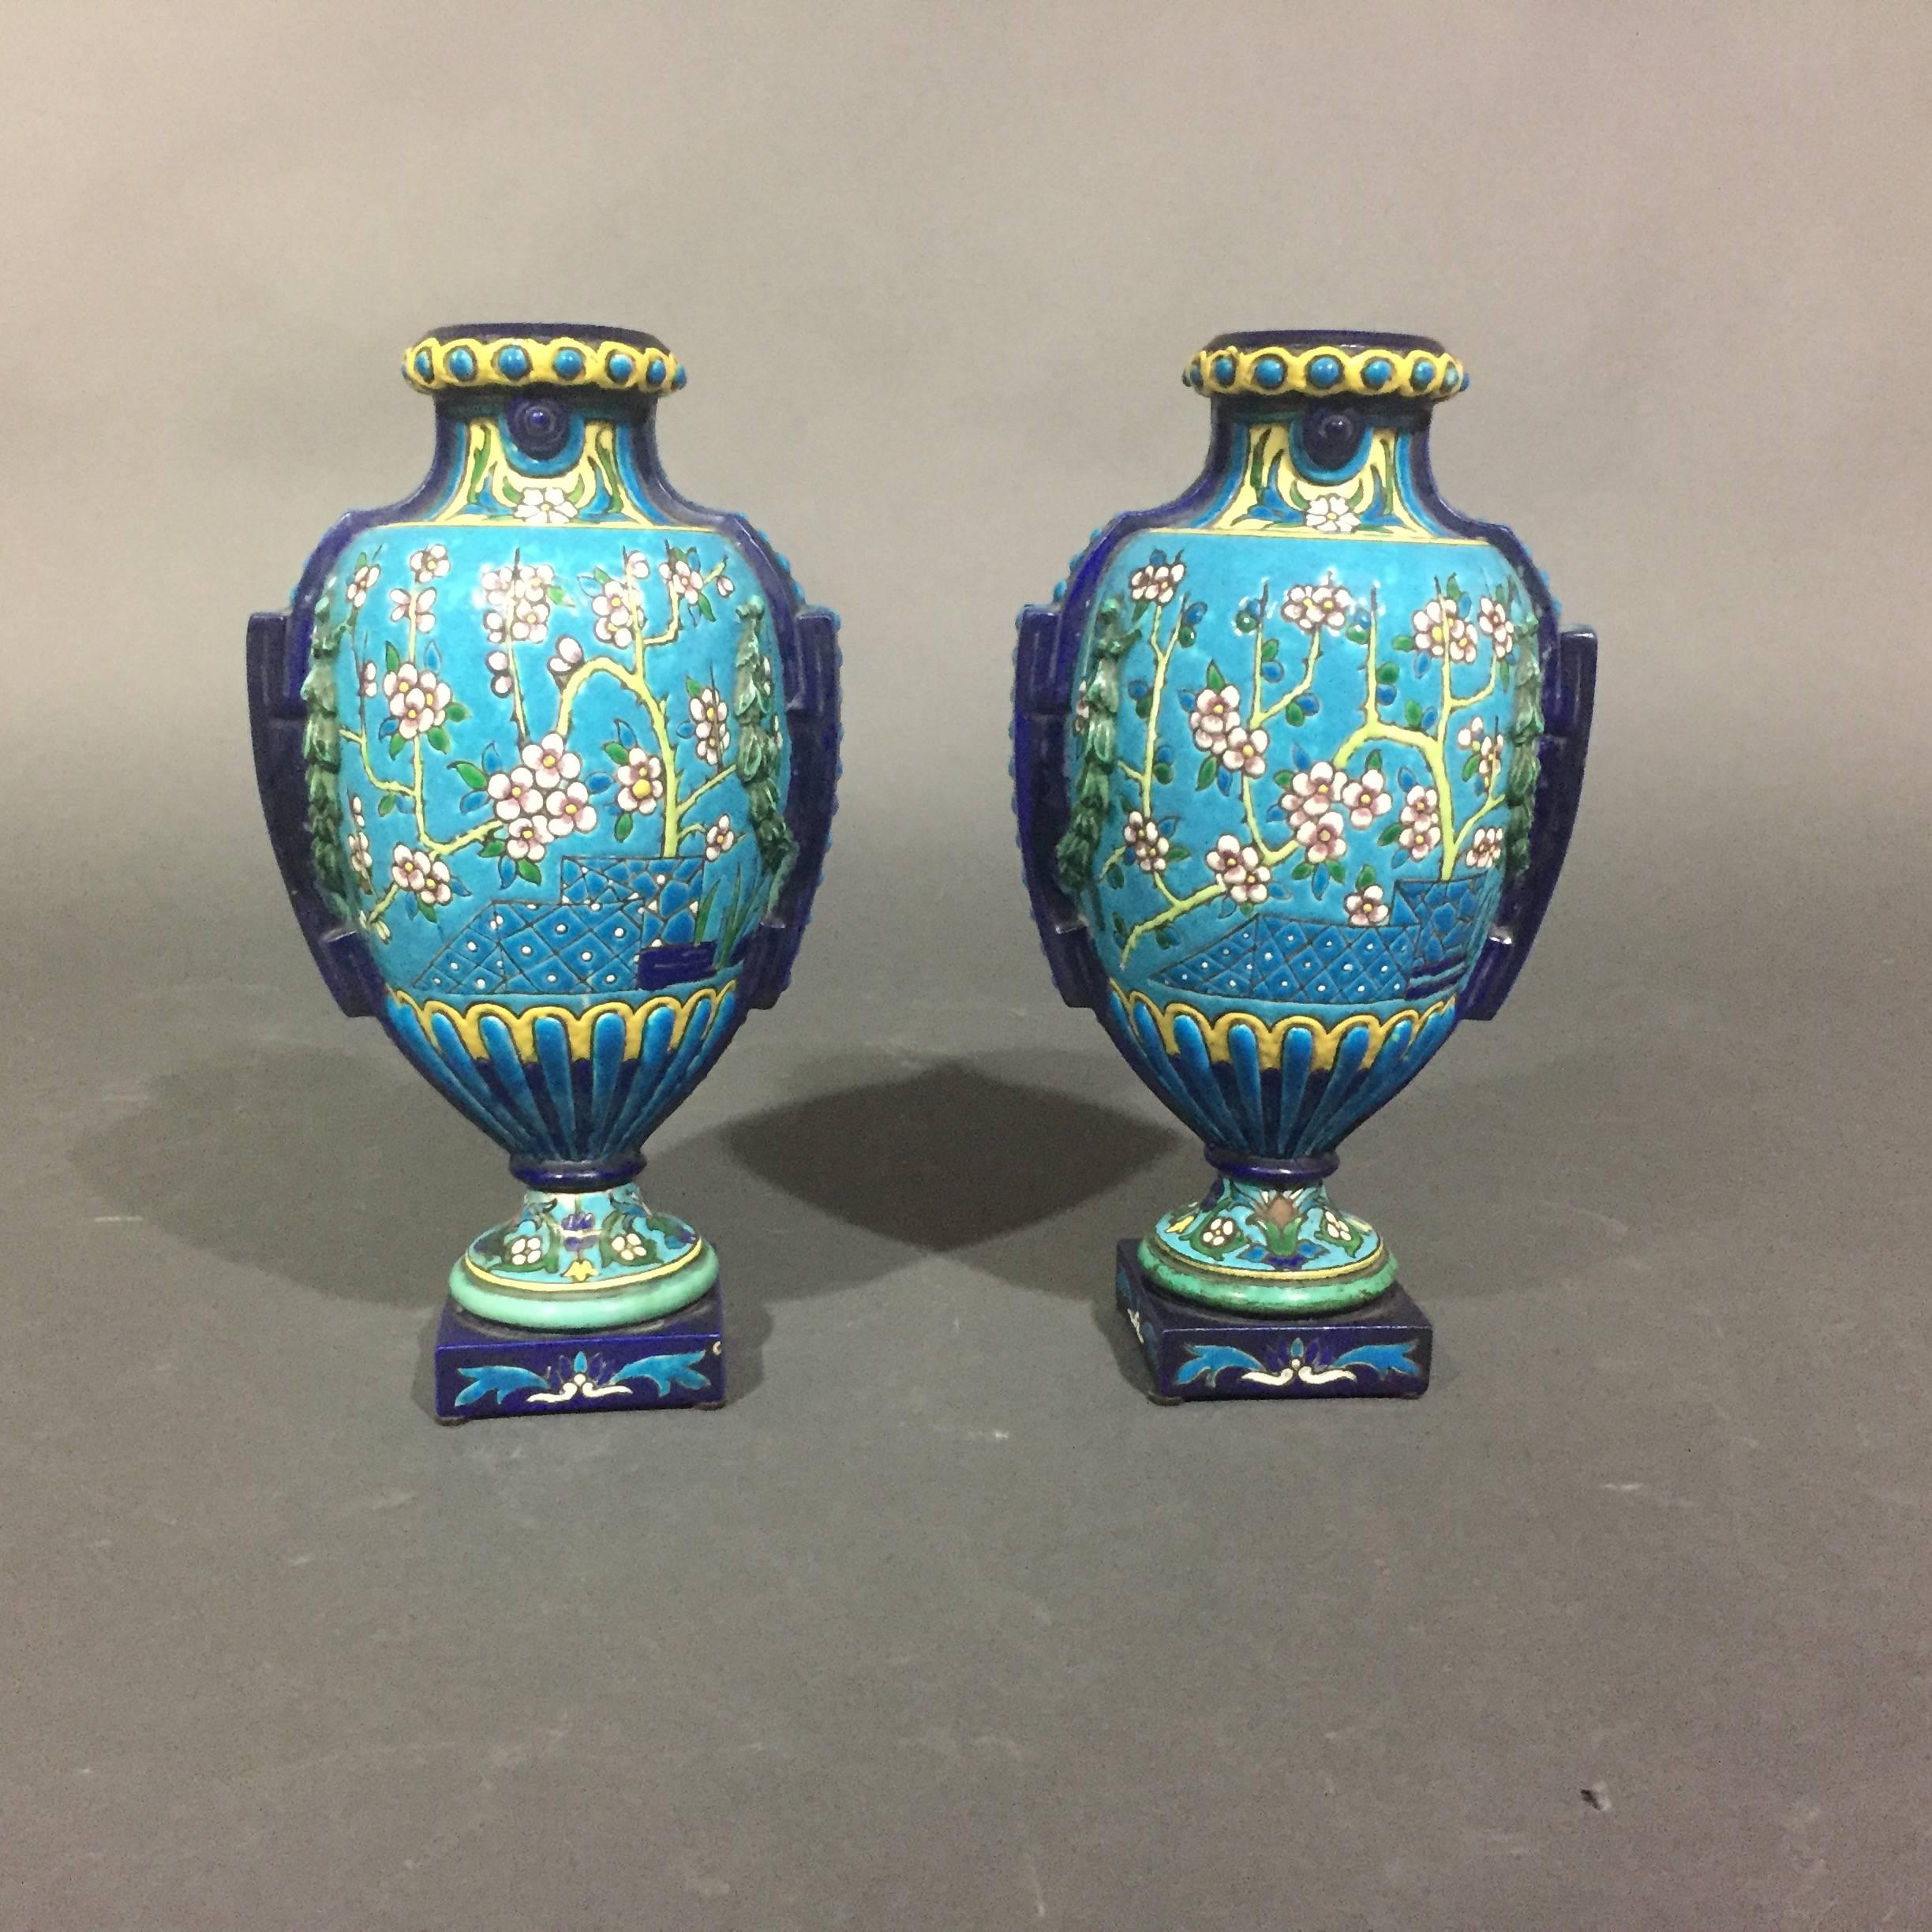 Pair of Emaux de Longwy Attributed Floral Enameled Vases, France In Good Condition For Sale In Hudson, NY